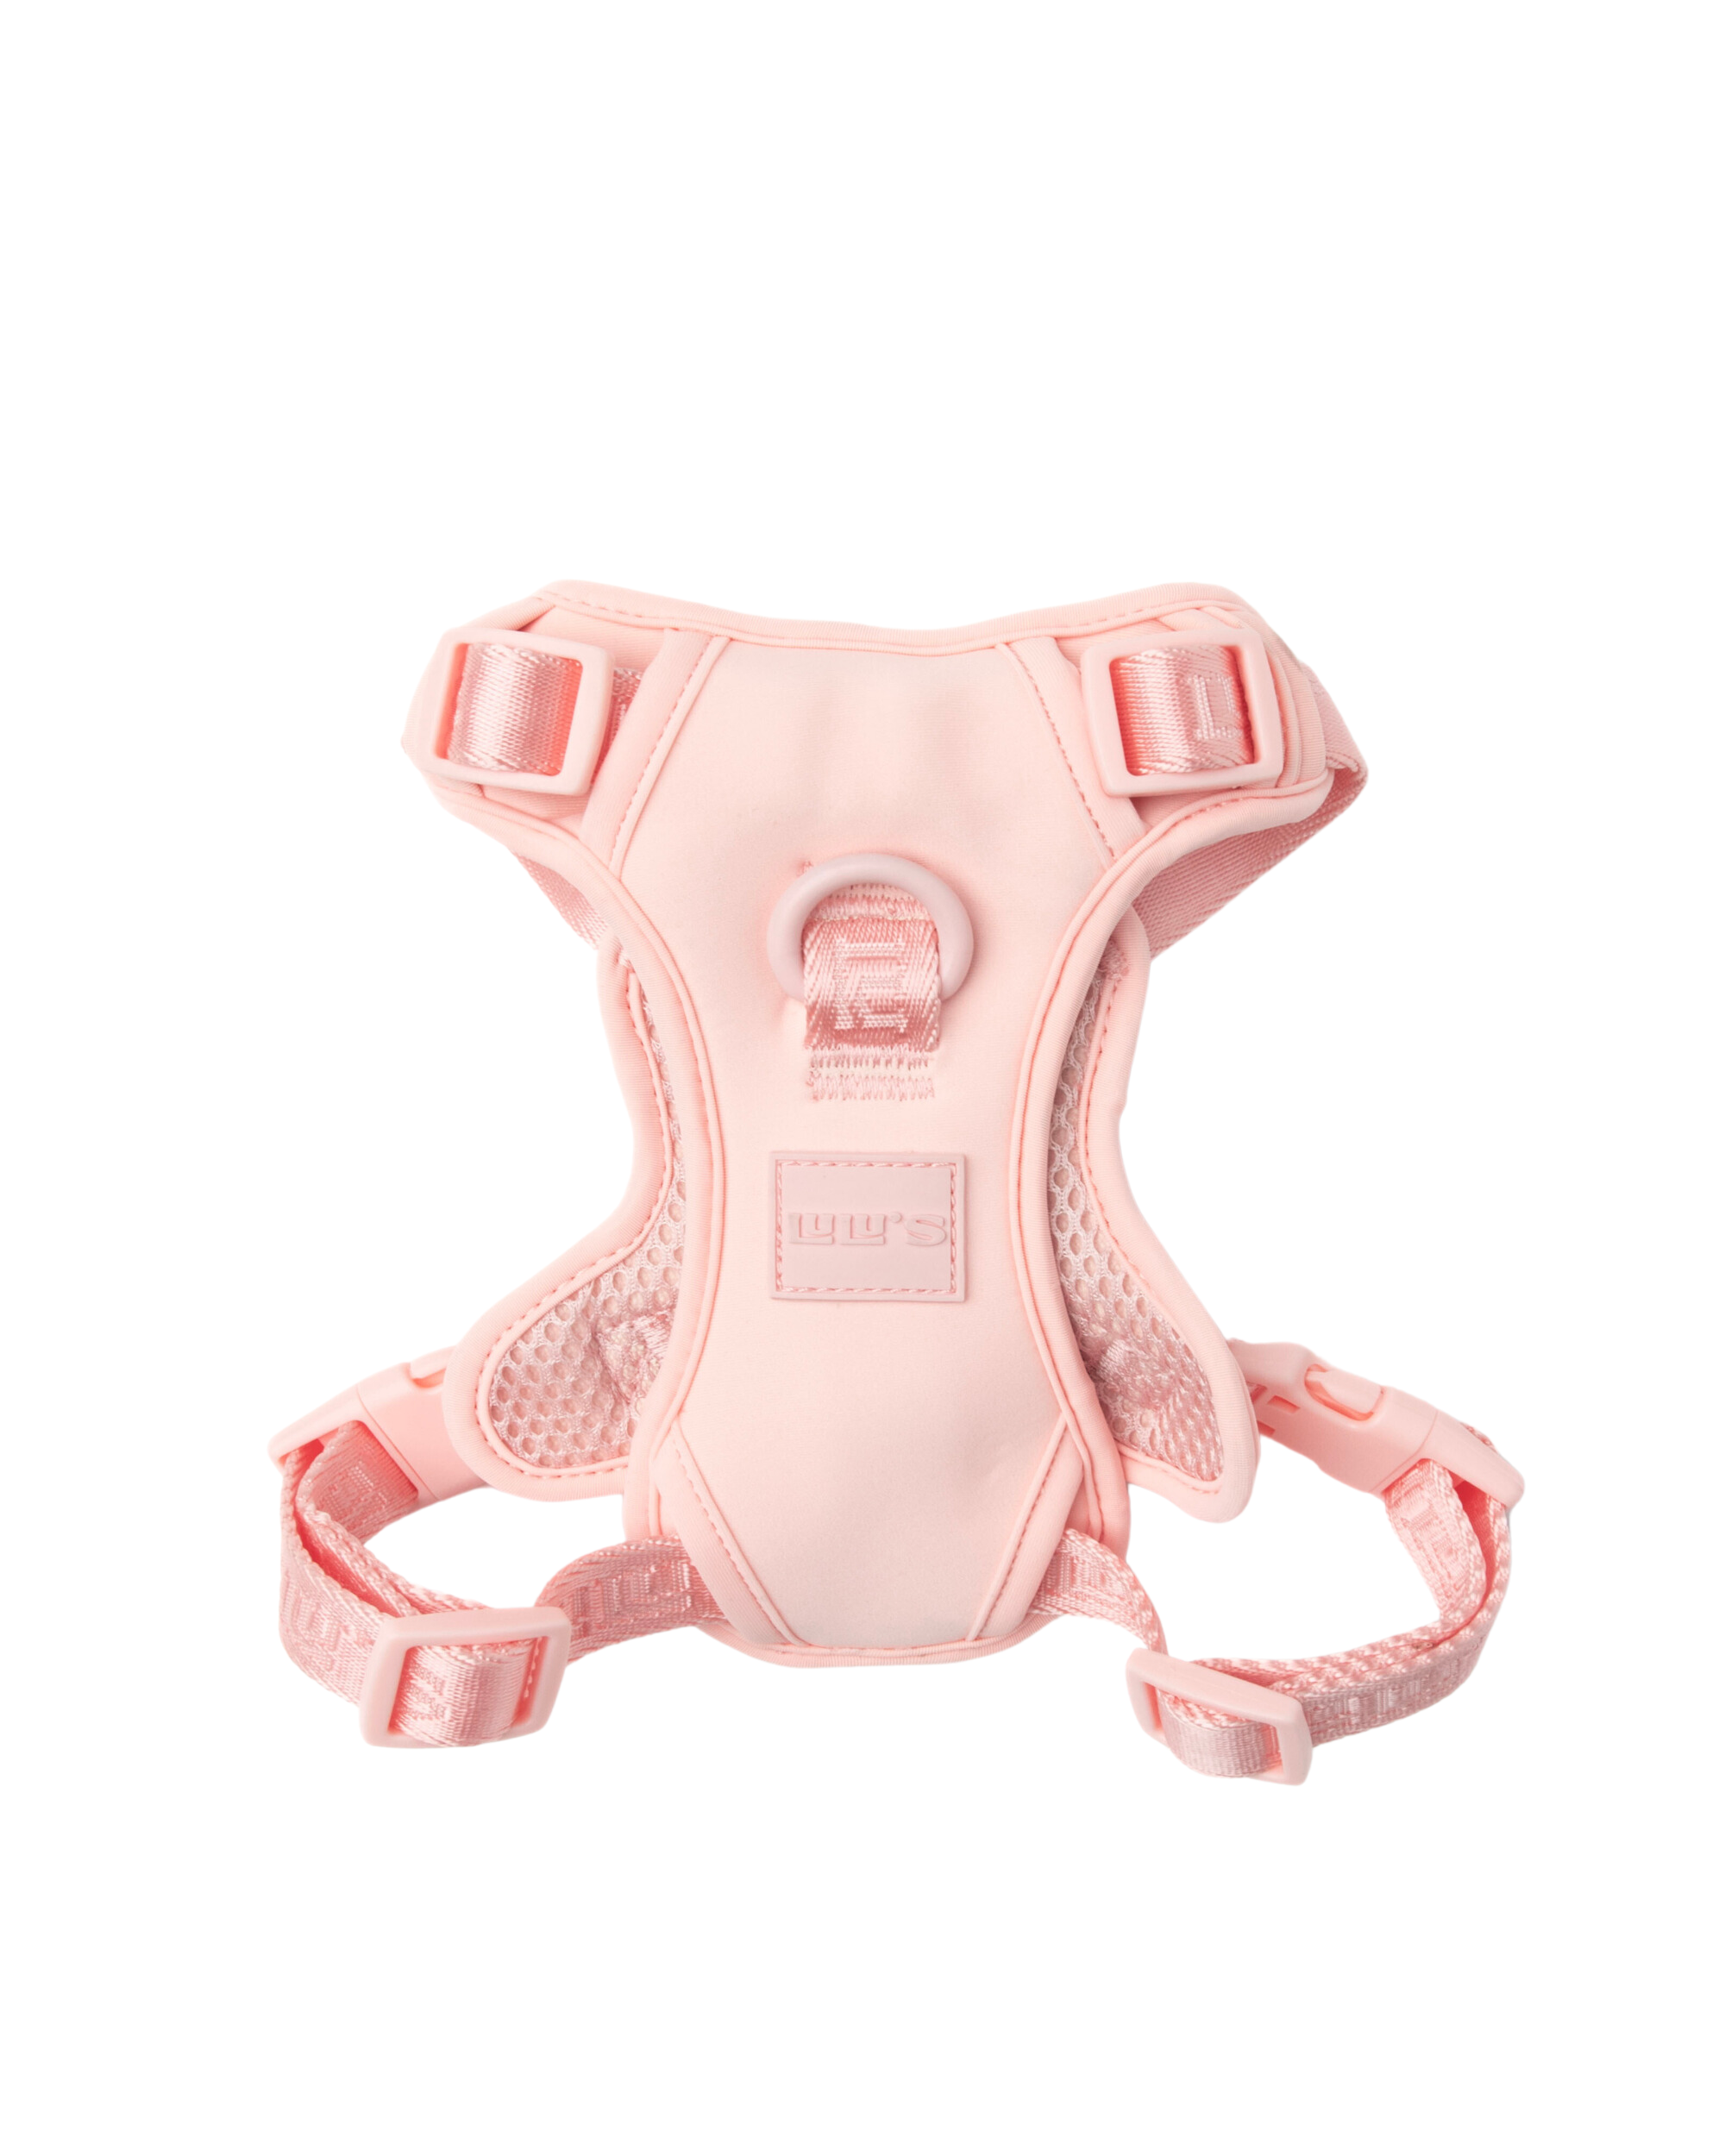 A Blush Pink dog harness displayed on a white background, showcasing its adjustable straps and breathable mesh design.